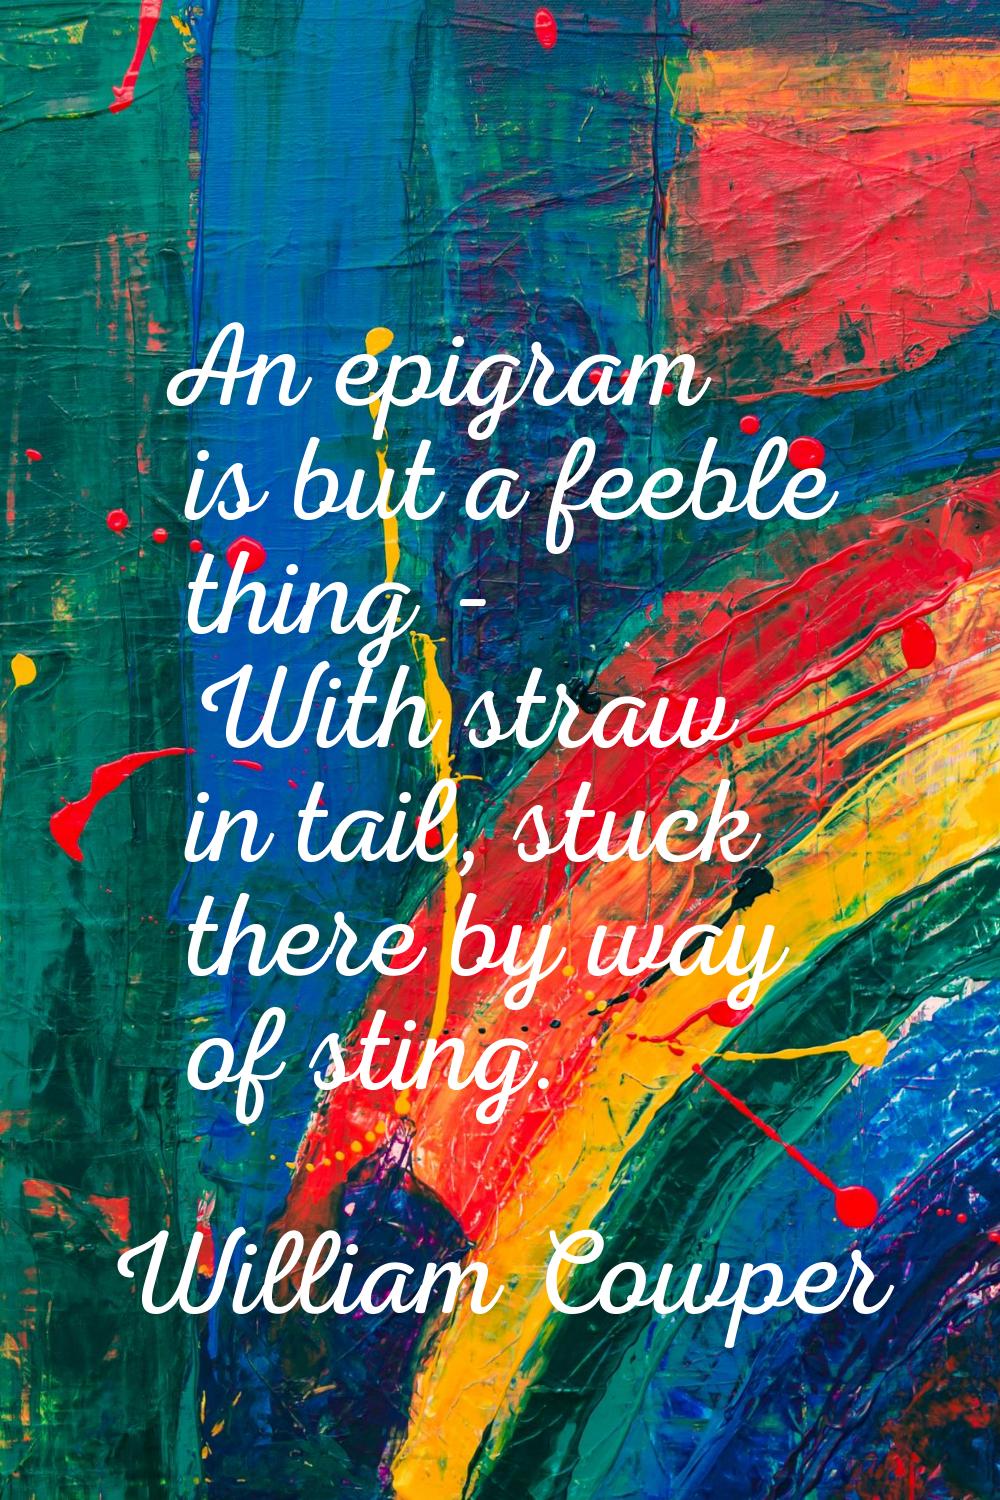 An epigram is but a feeble thing - With straw in tail, stuck there by way of sting.